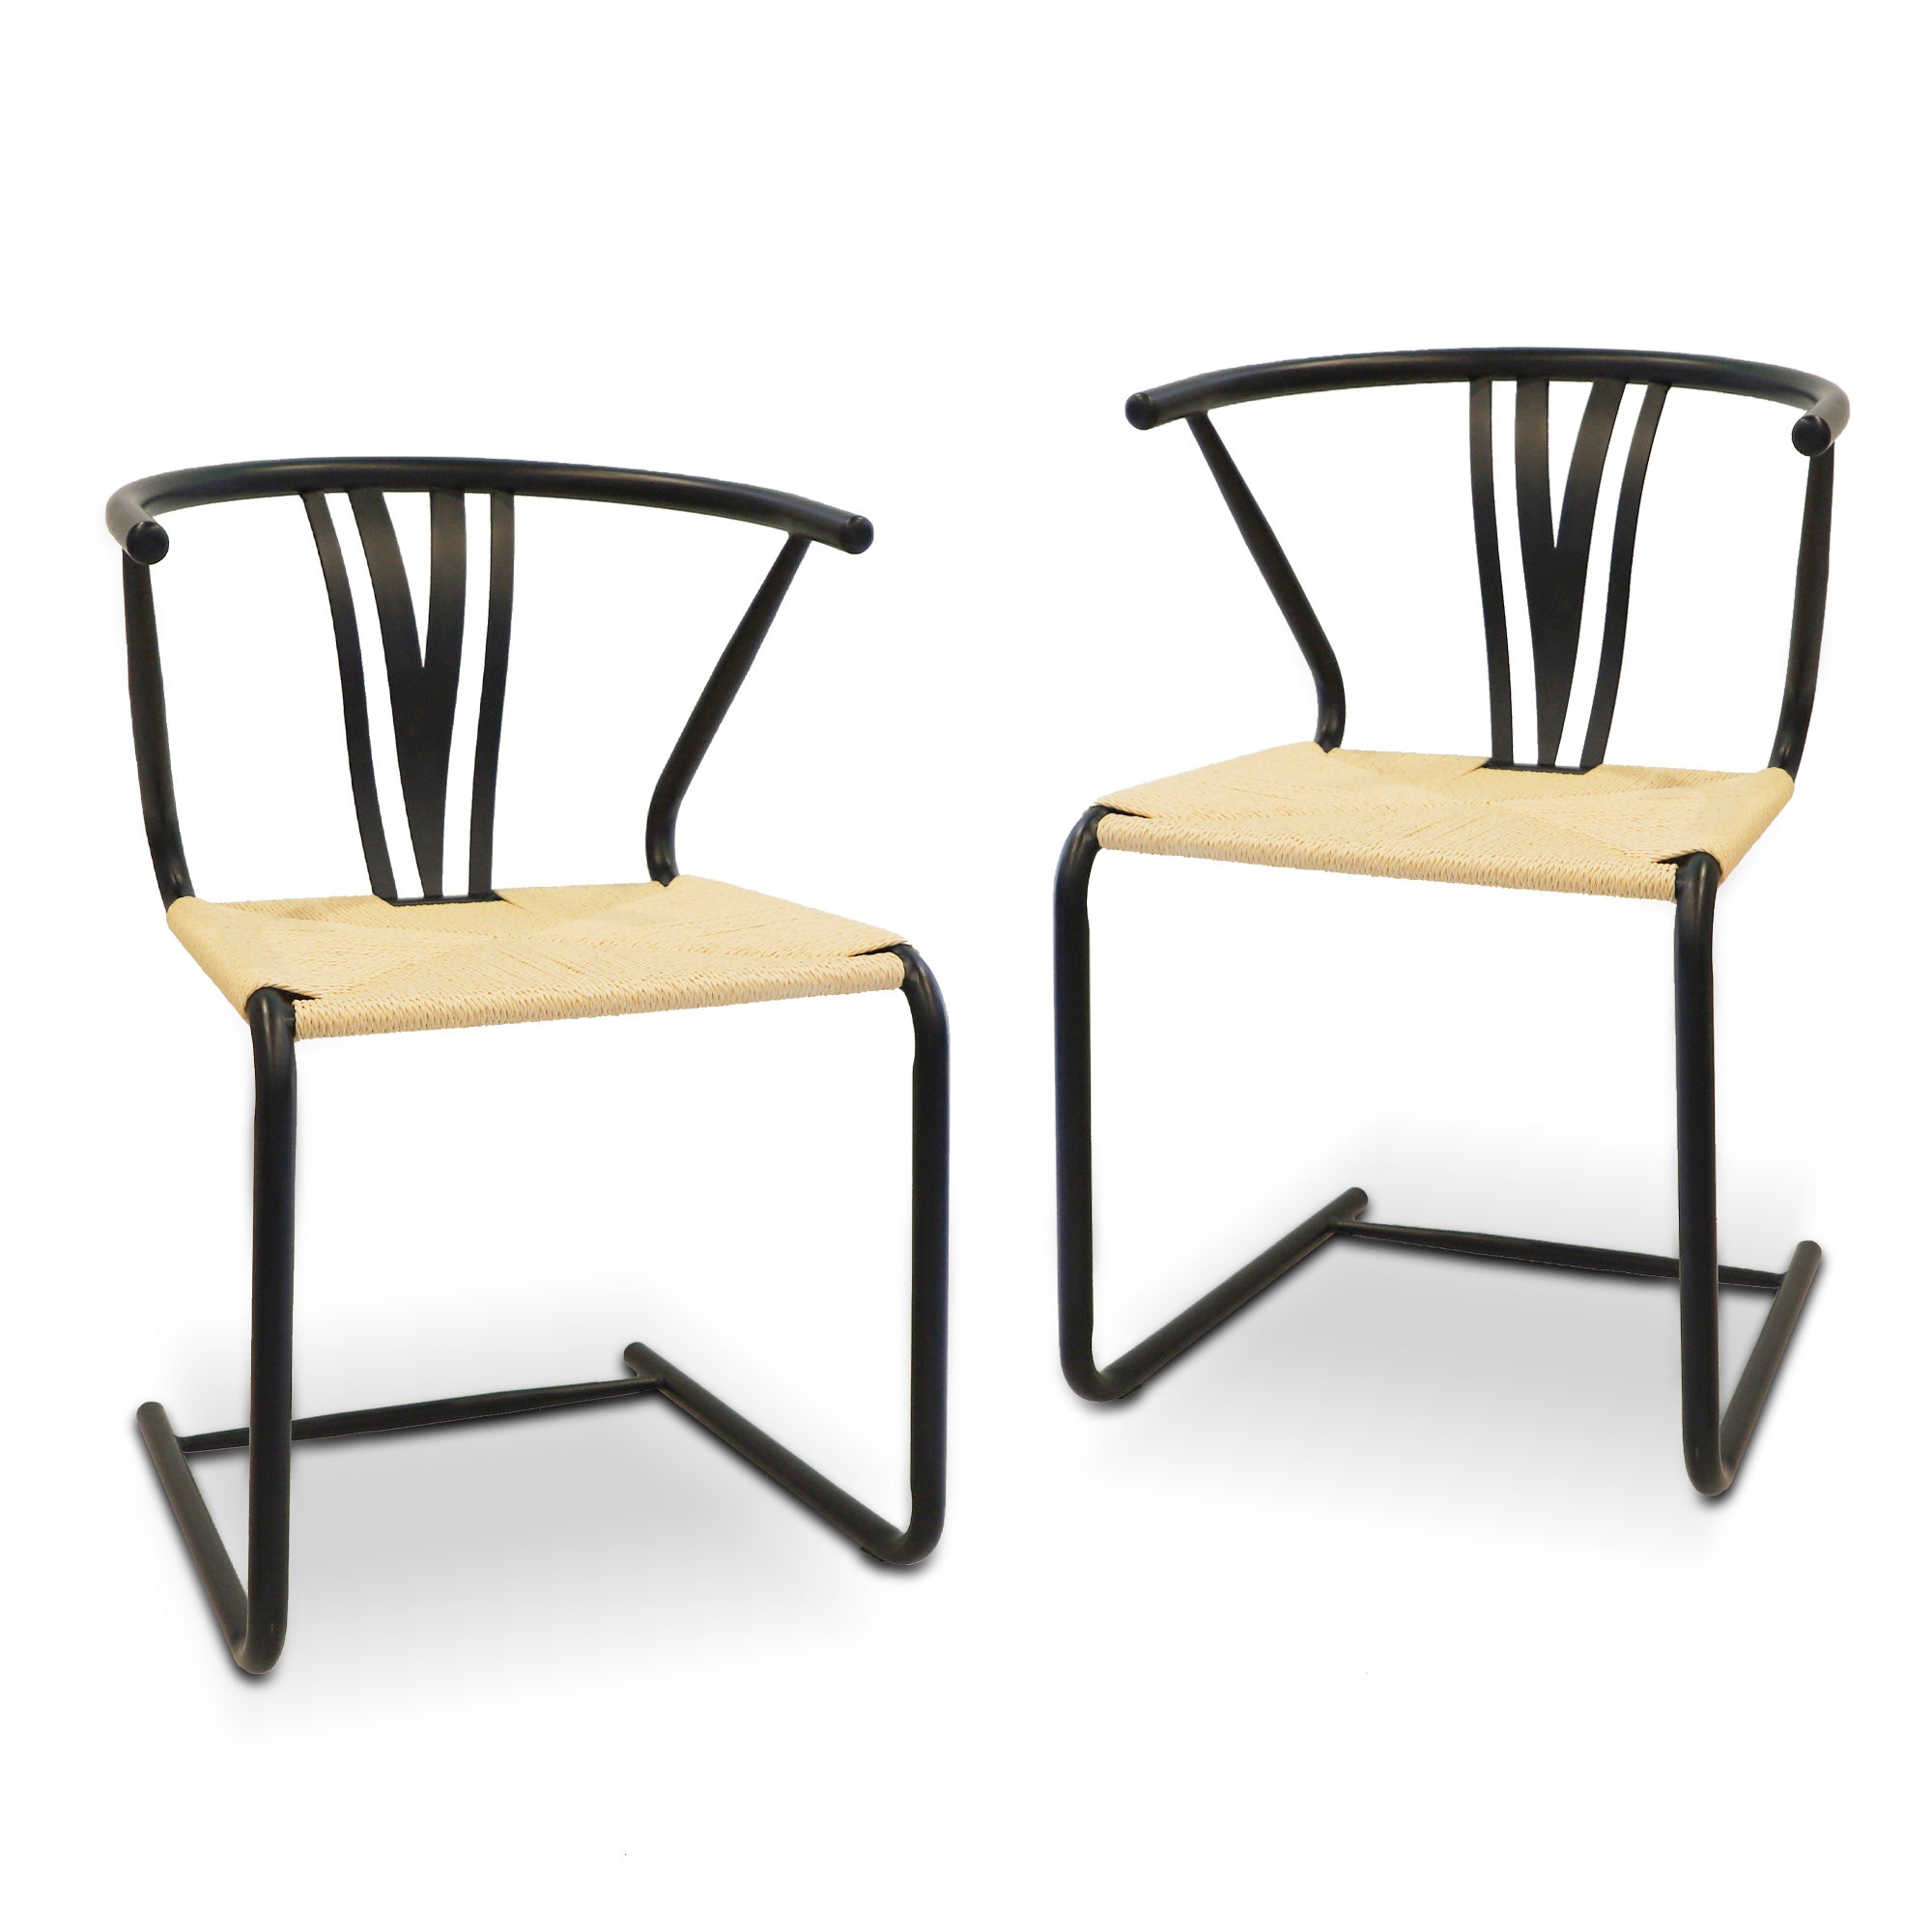 Black Wishbone Dining Chair Set of 2 Hand-Woven Paper Rattan Chairs